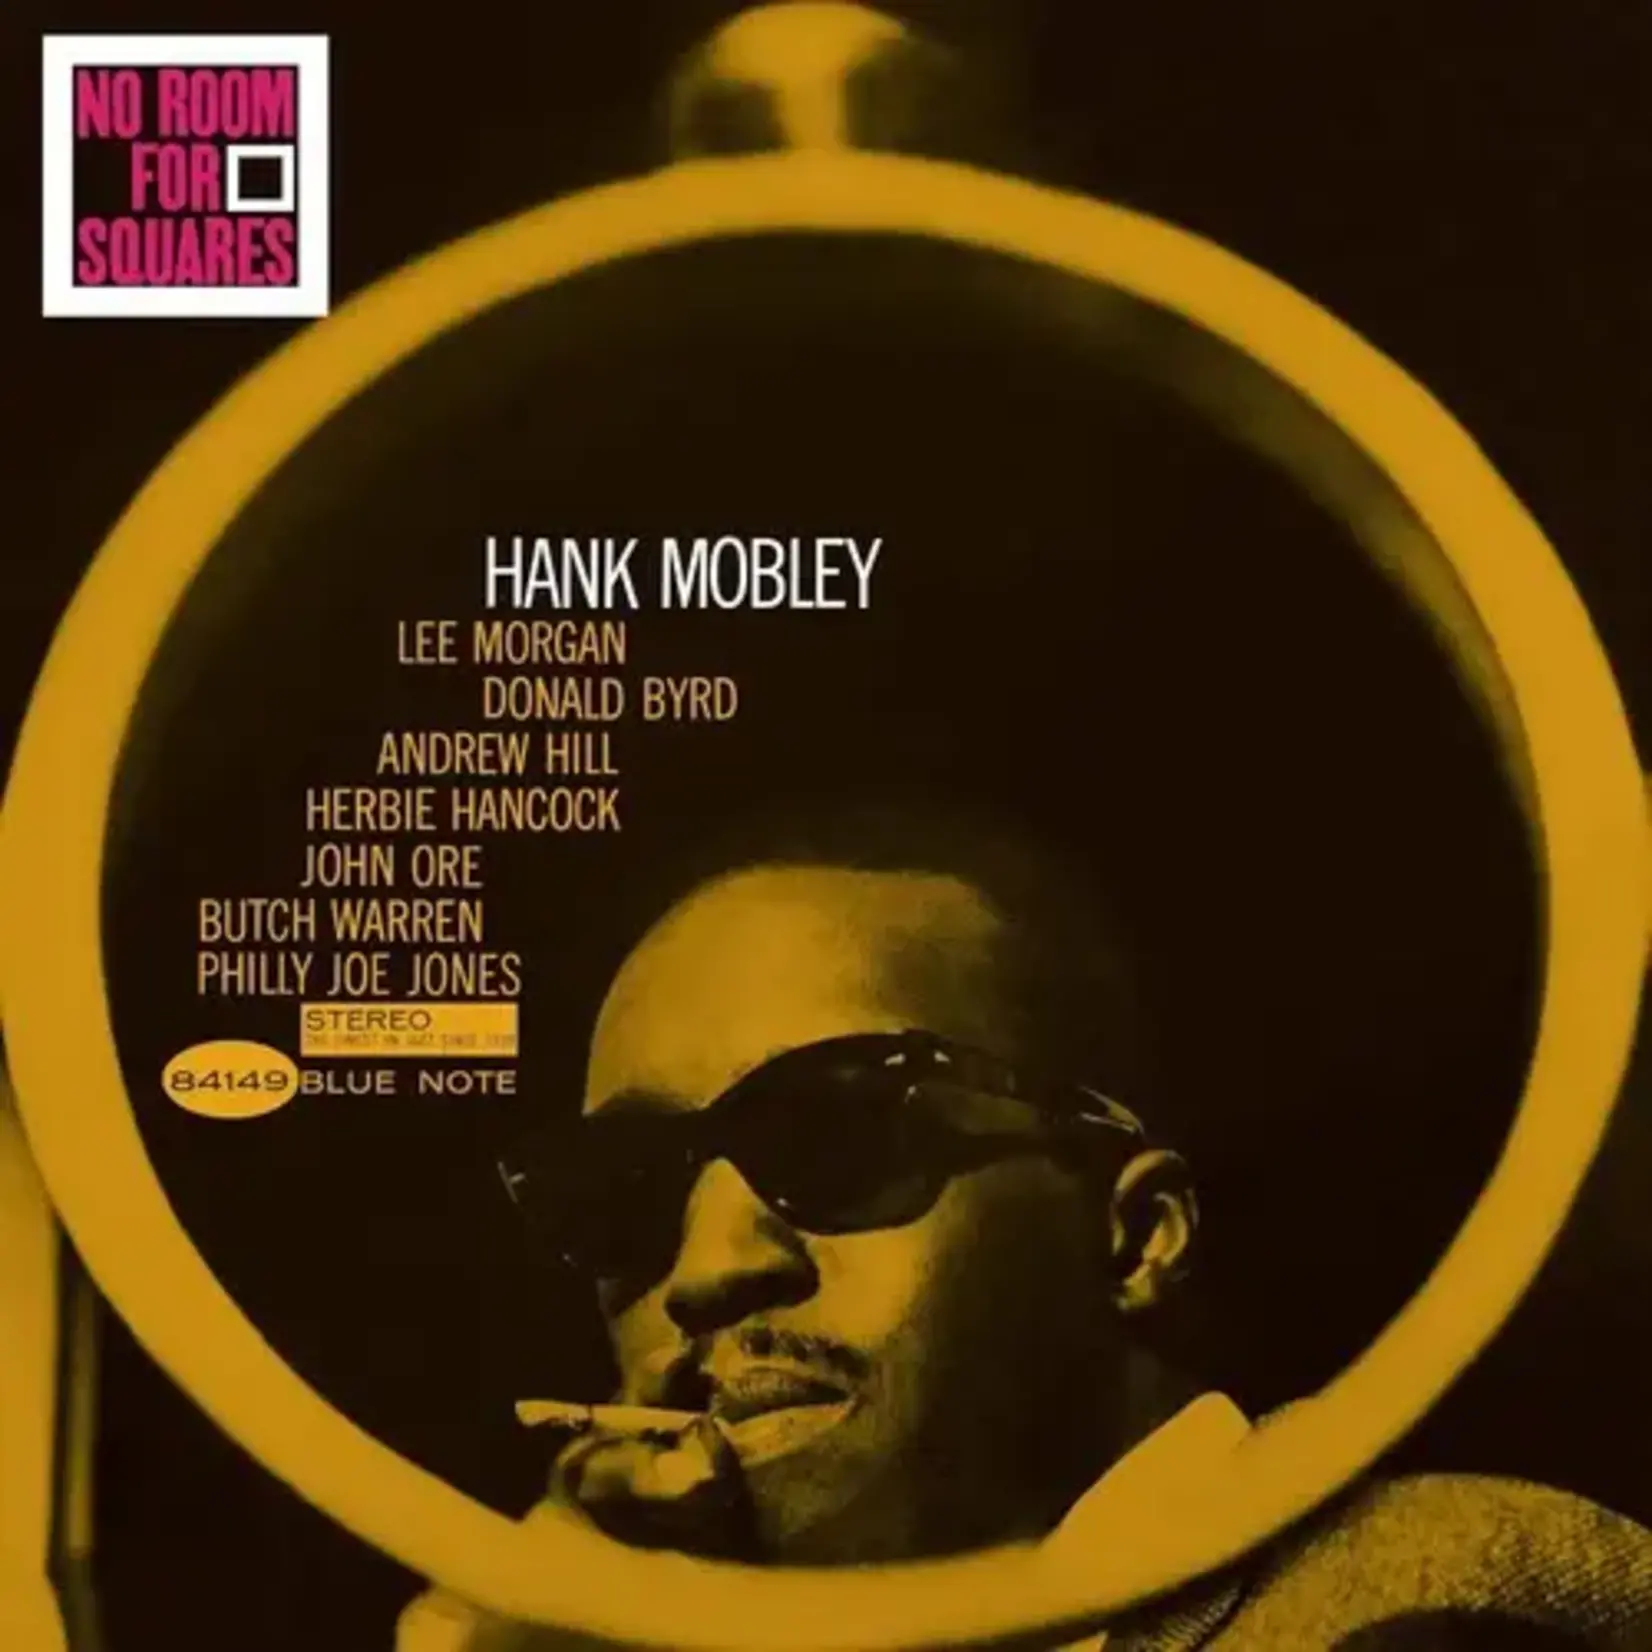 [New] Hank Mobley - No Room For Squares (Blue Note Classic Vinyl Series)